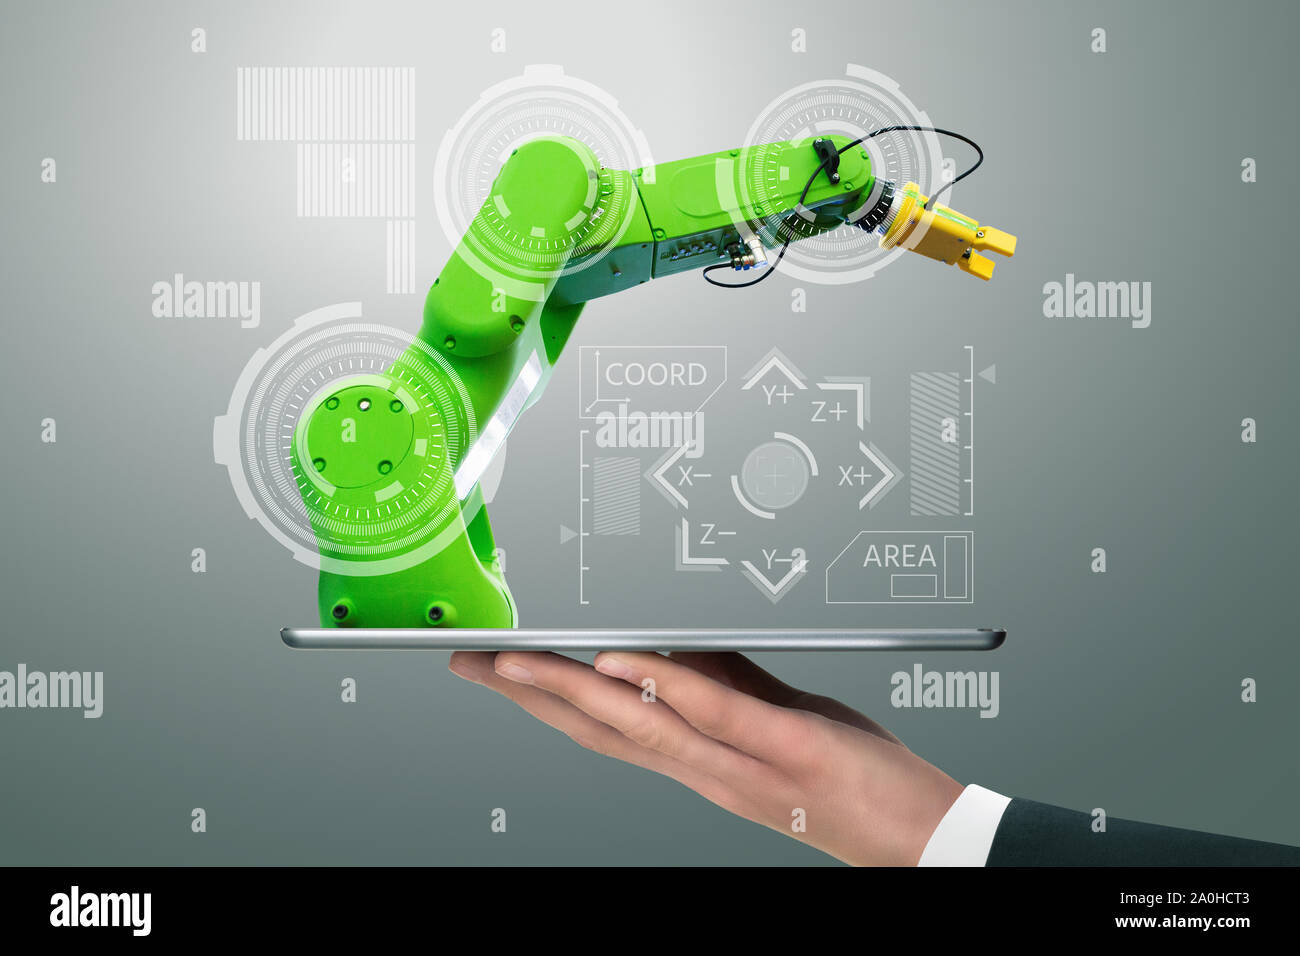 Man holding a digital tablet with handling robot with robotic arm. Stock Photo